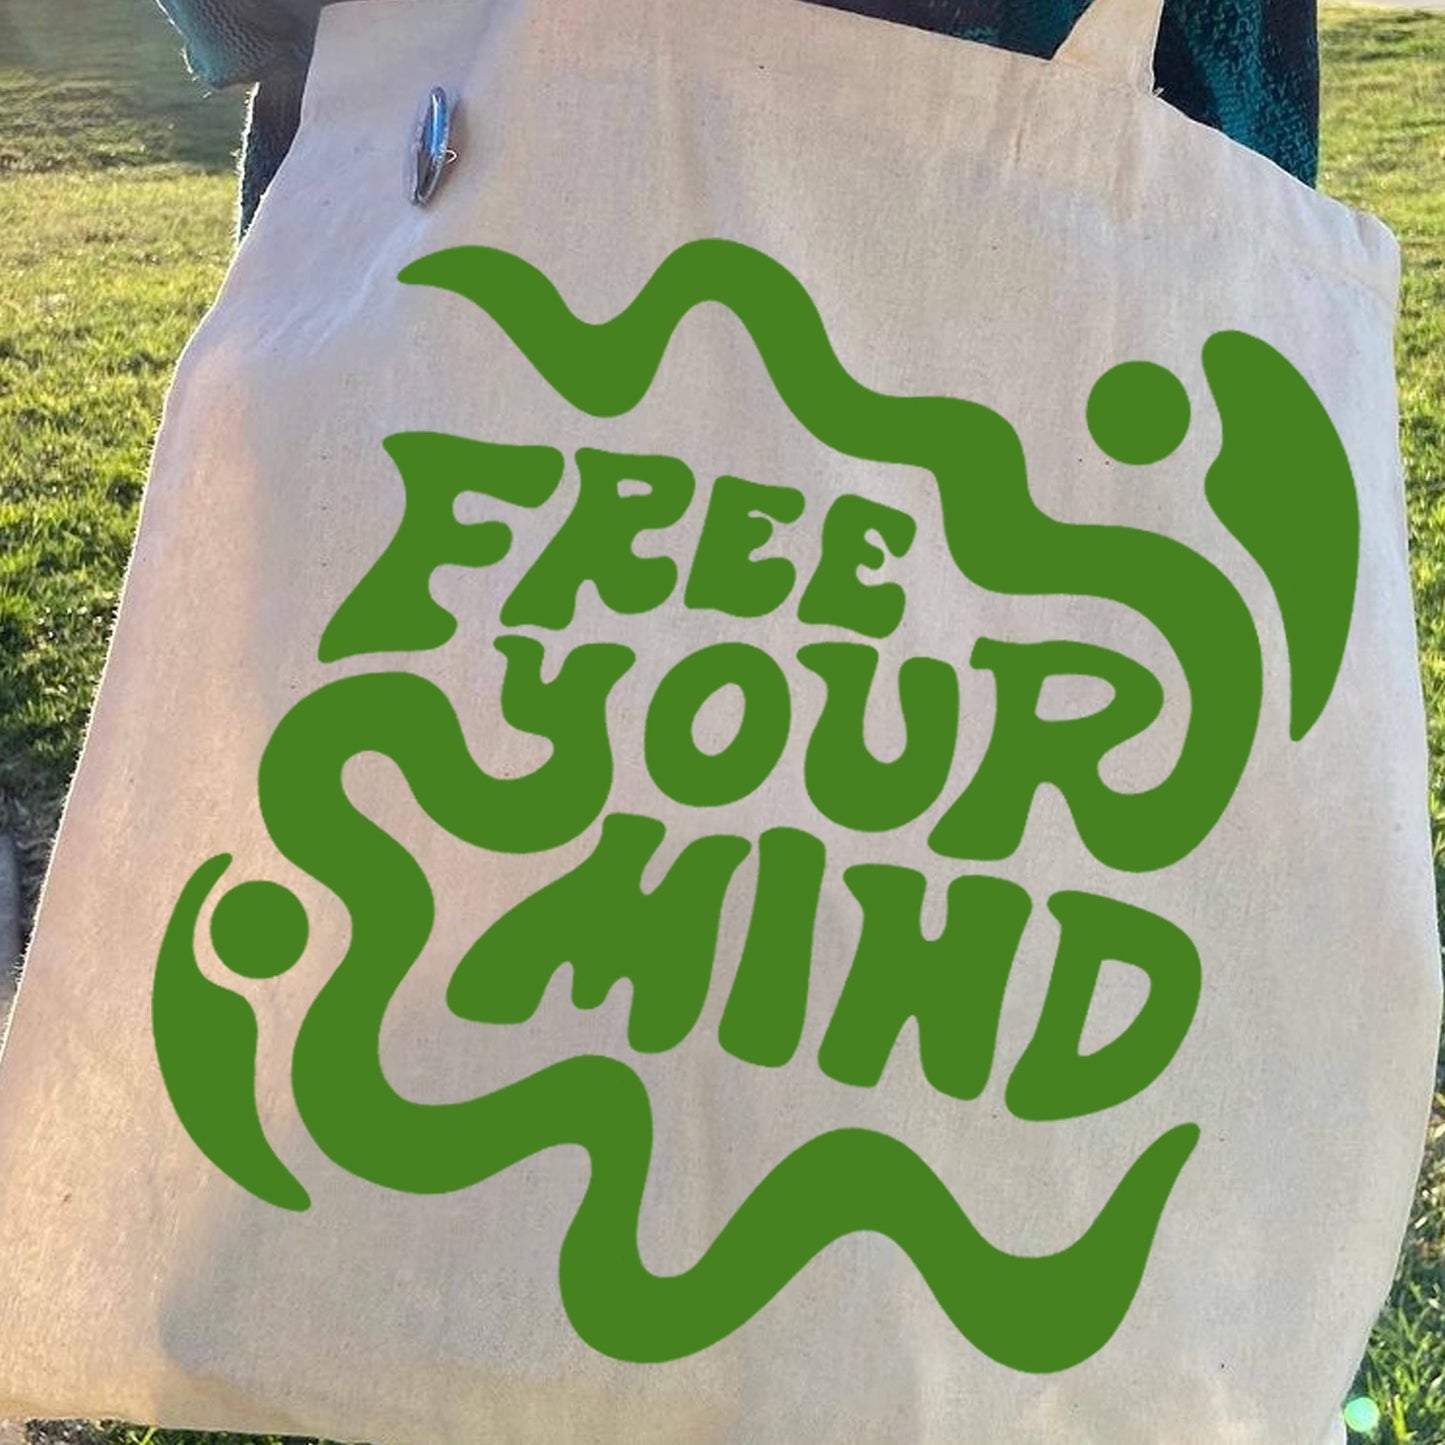 Cotton Free Your Mind Tote, Canvas Tote Bag, Reusable Tote,